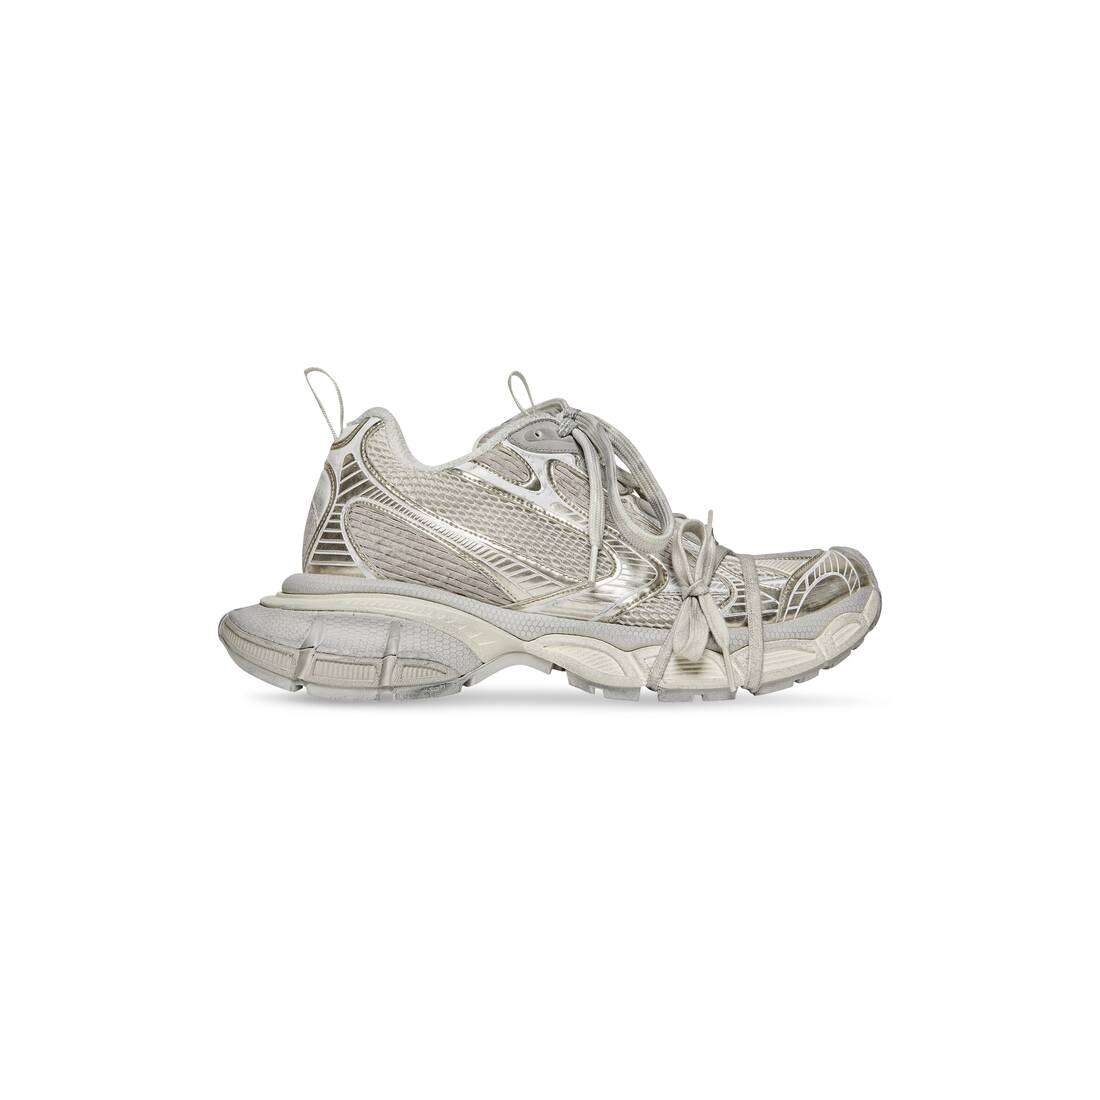 Womens Balenciaga Sneakers  Athletic Shoes  Nordstrom